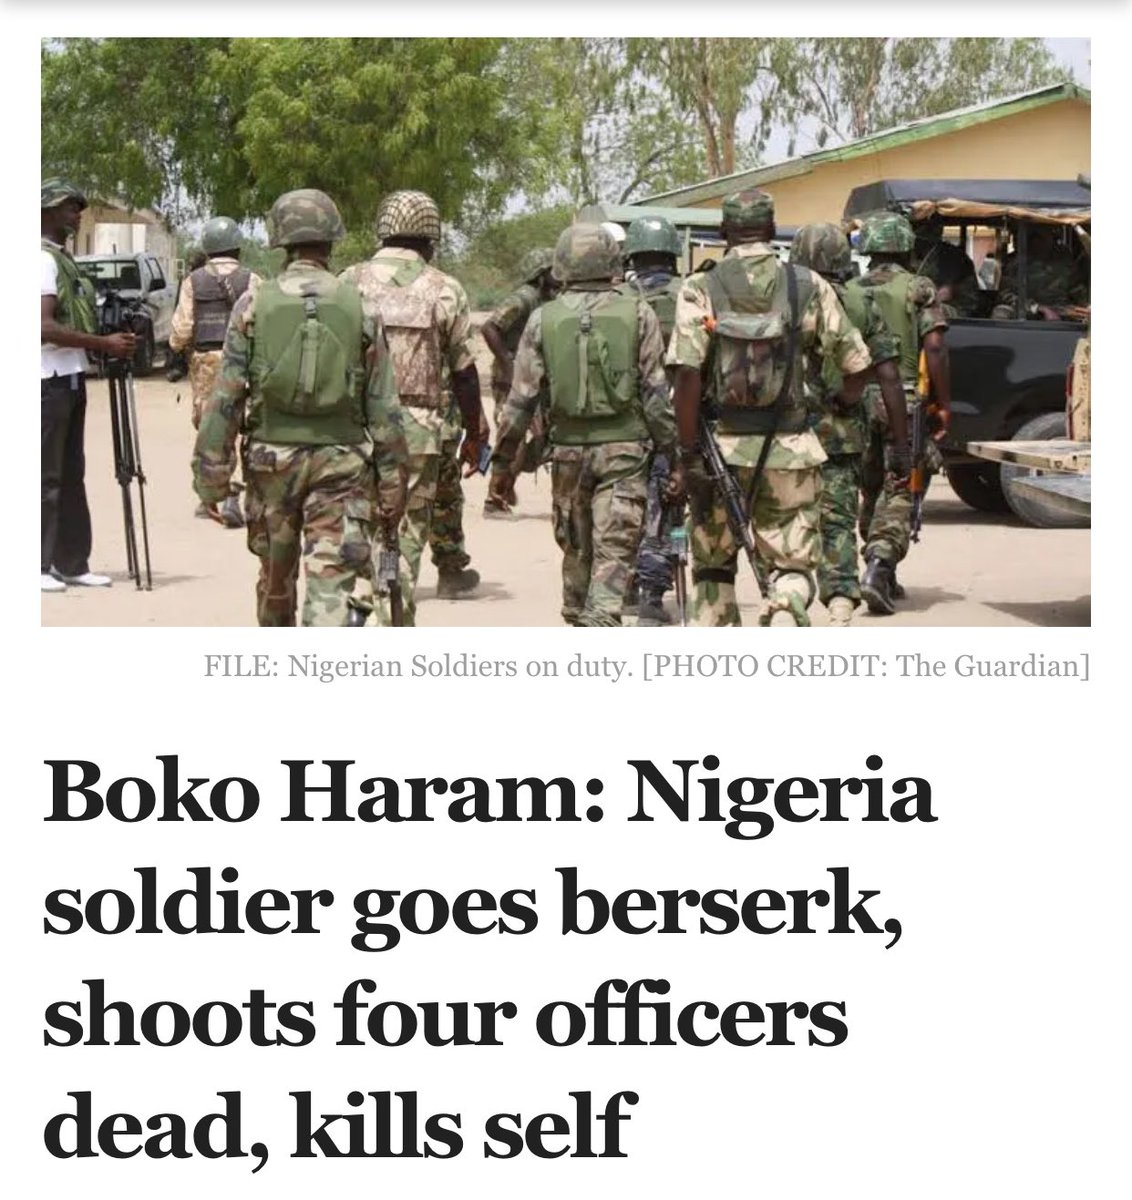 Nigeria Soldier killed four of his colleagues and killed himself.